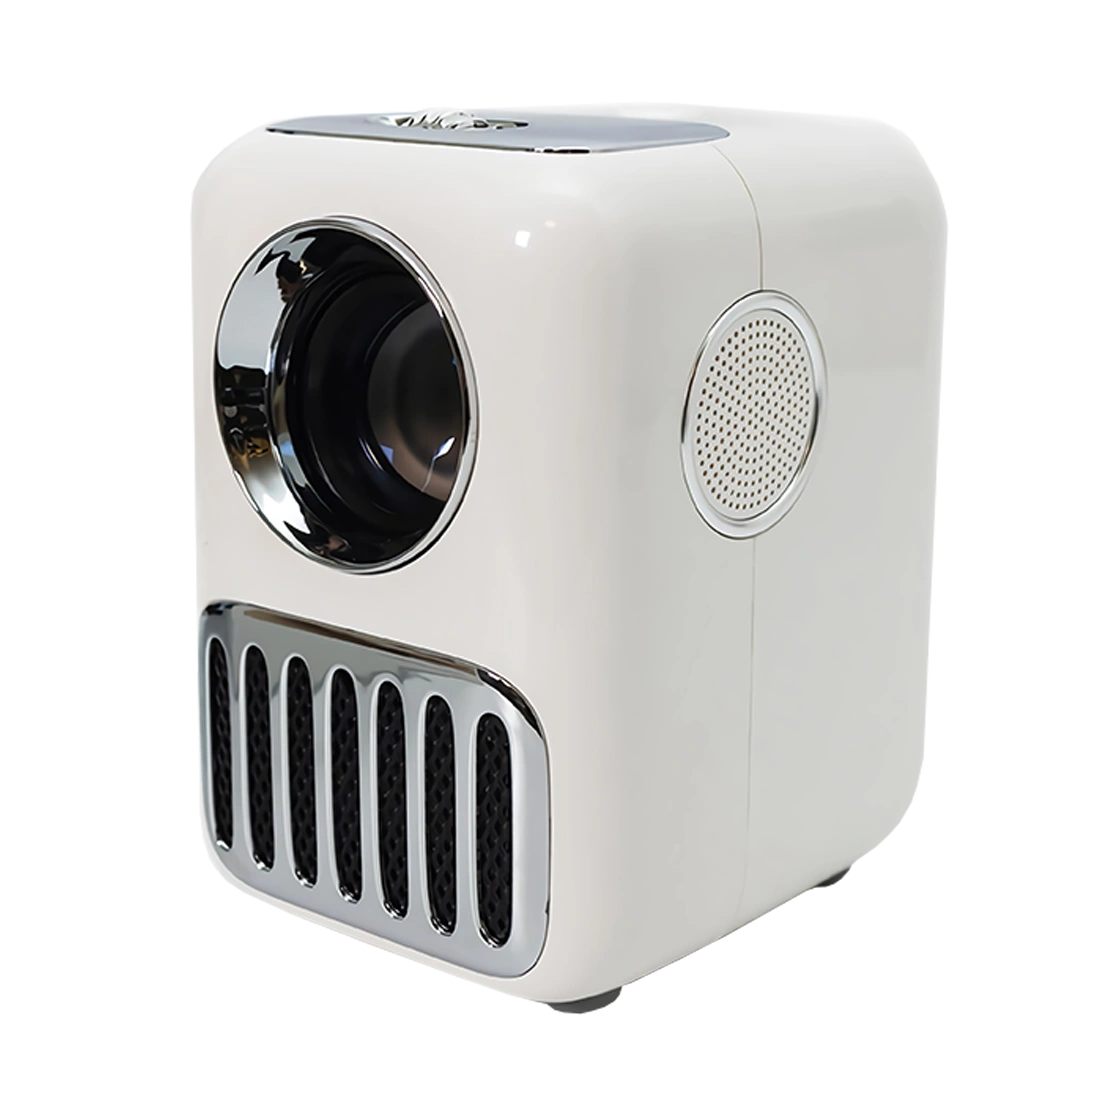 wanbo-portable-video-projector-tr2-max